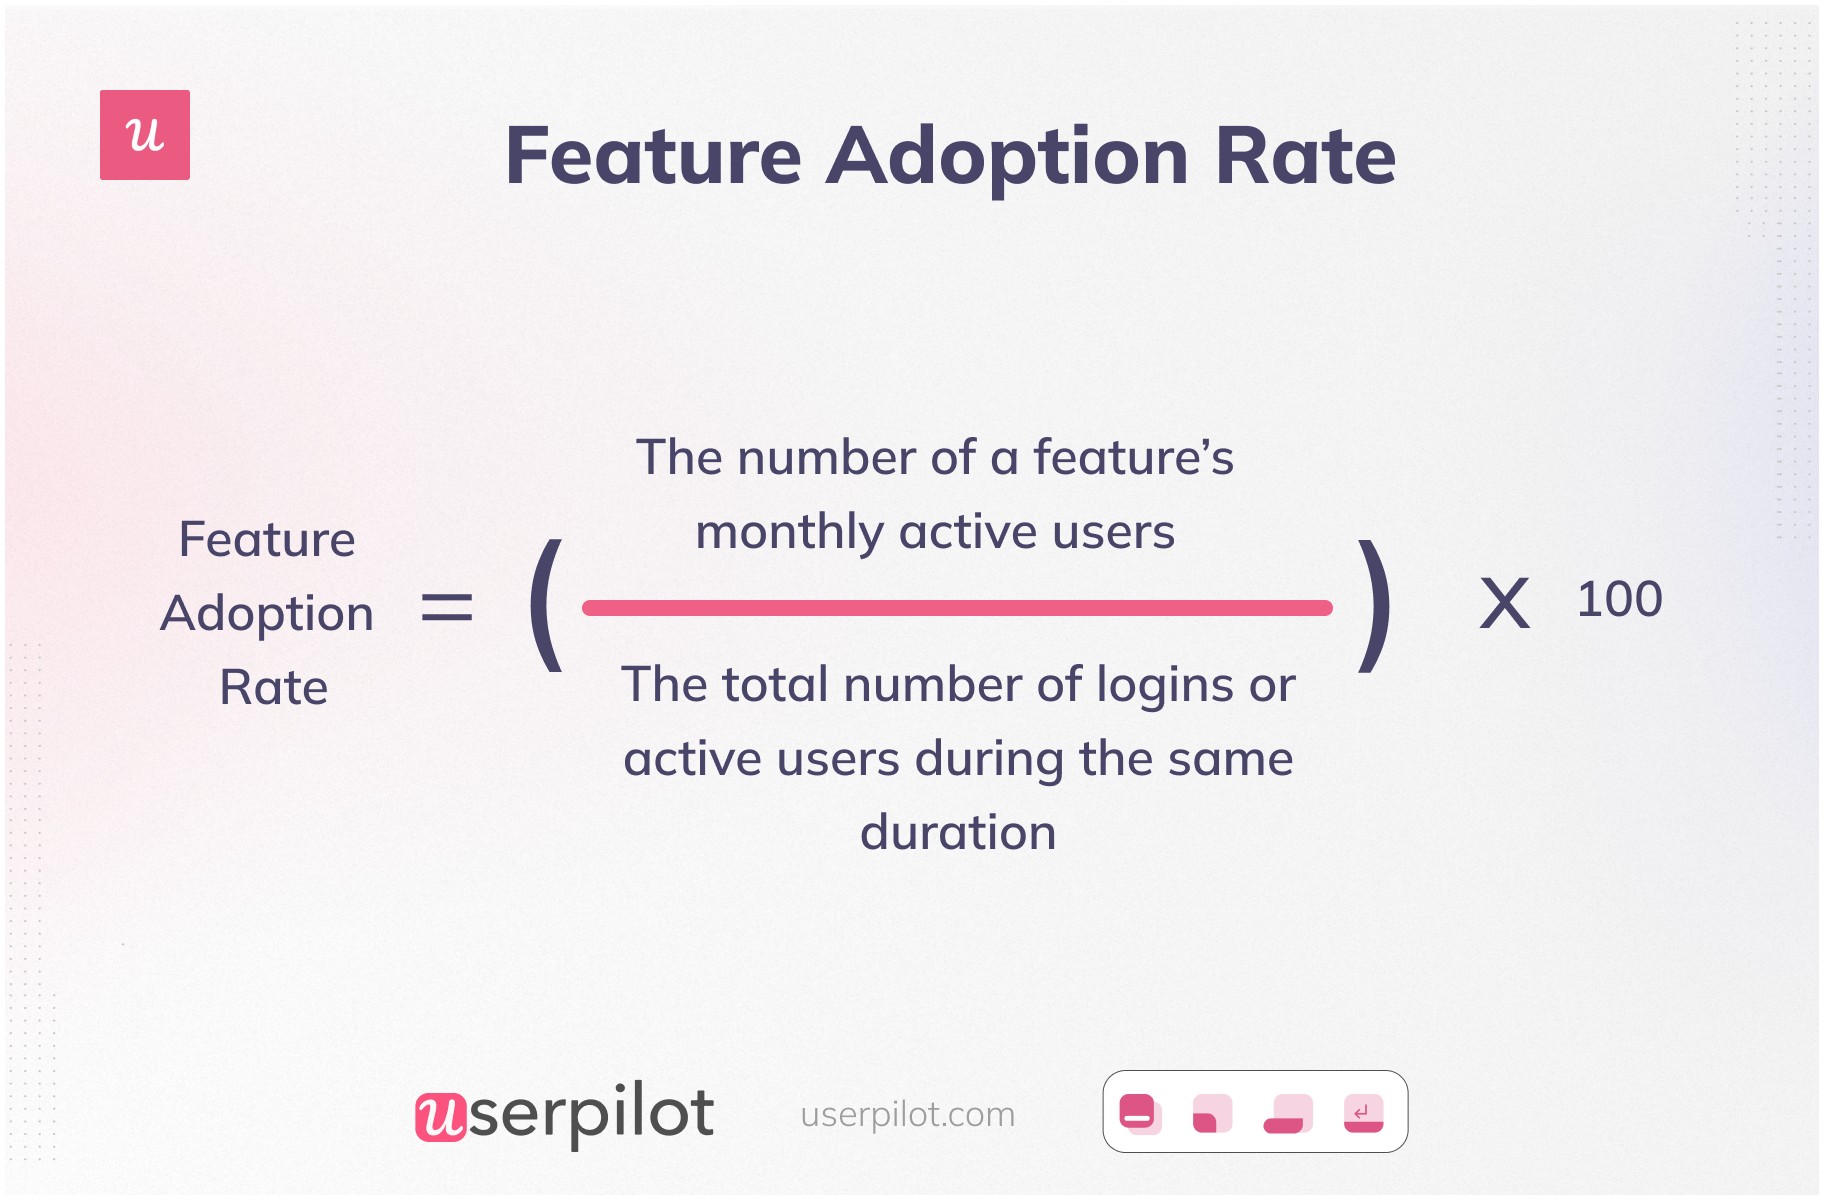 How to calculate feature adoption rate